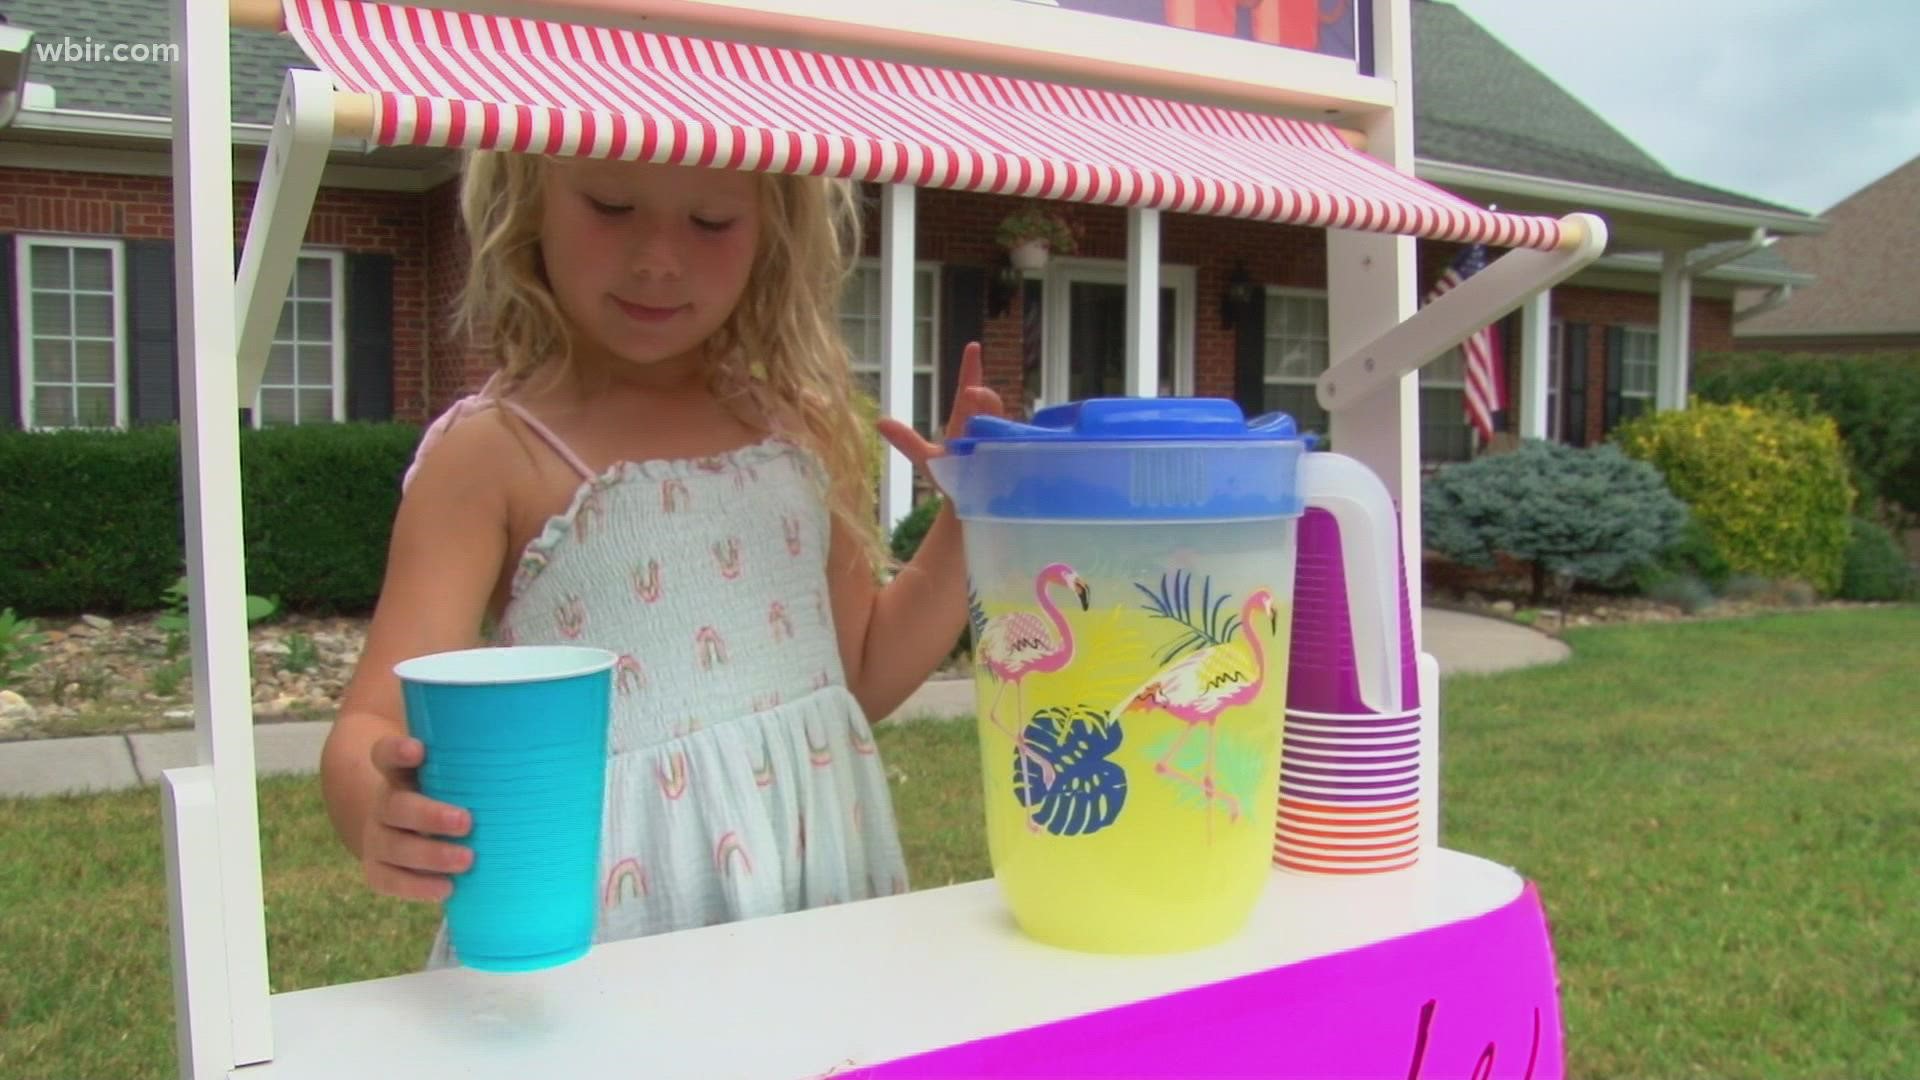 Emery Cole chose to raise money with a sweet homemade treat -- going well beyond her original goal of $100.